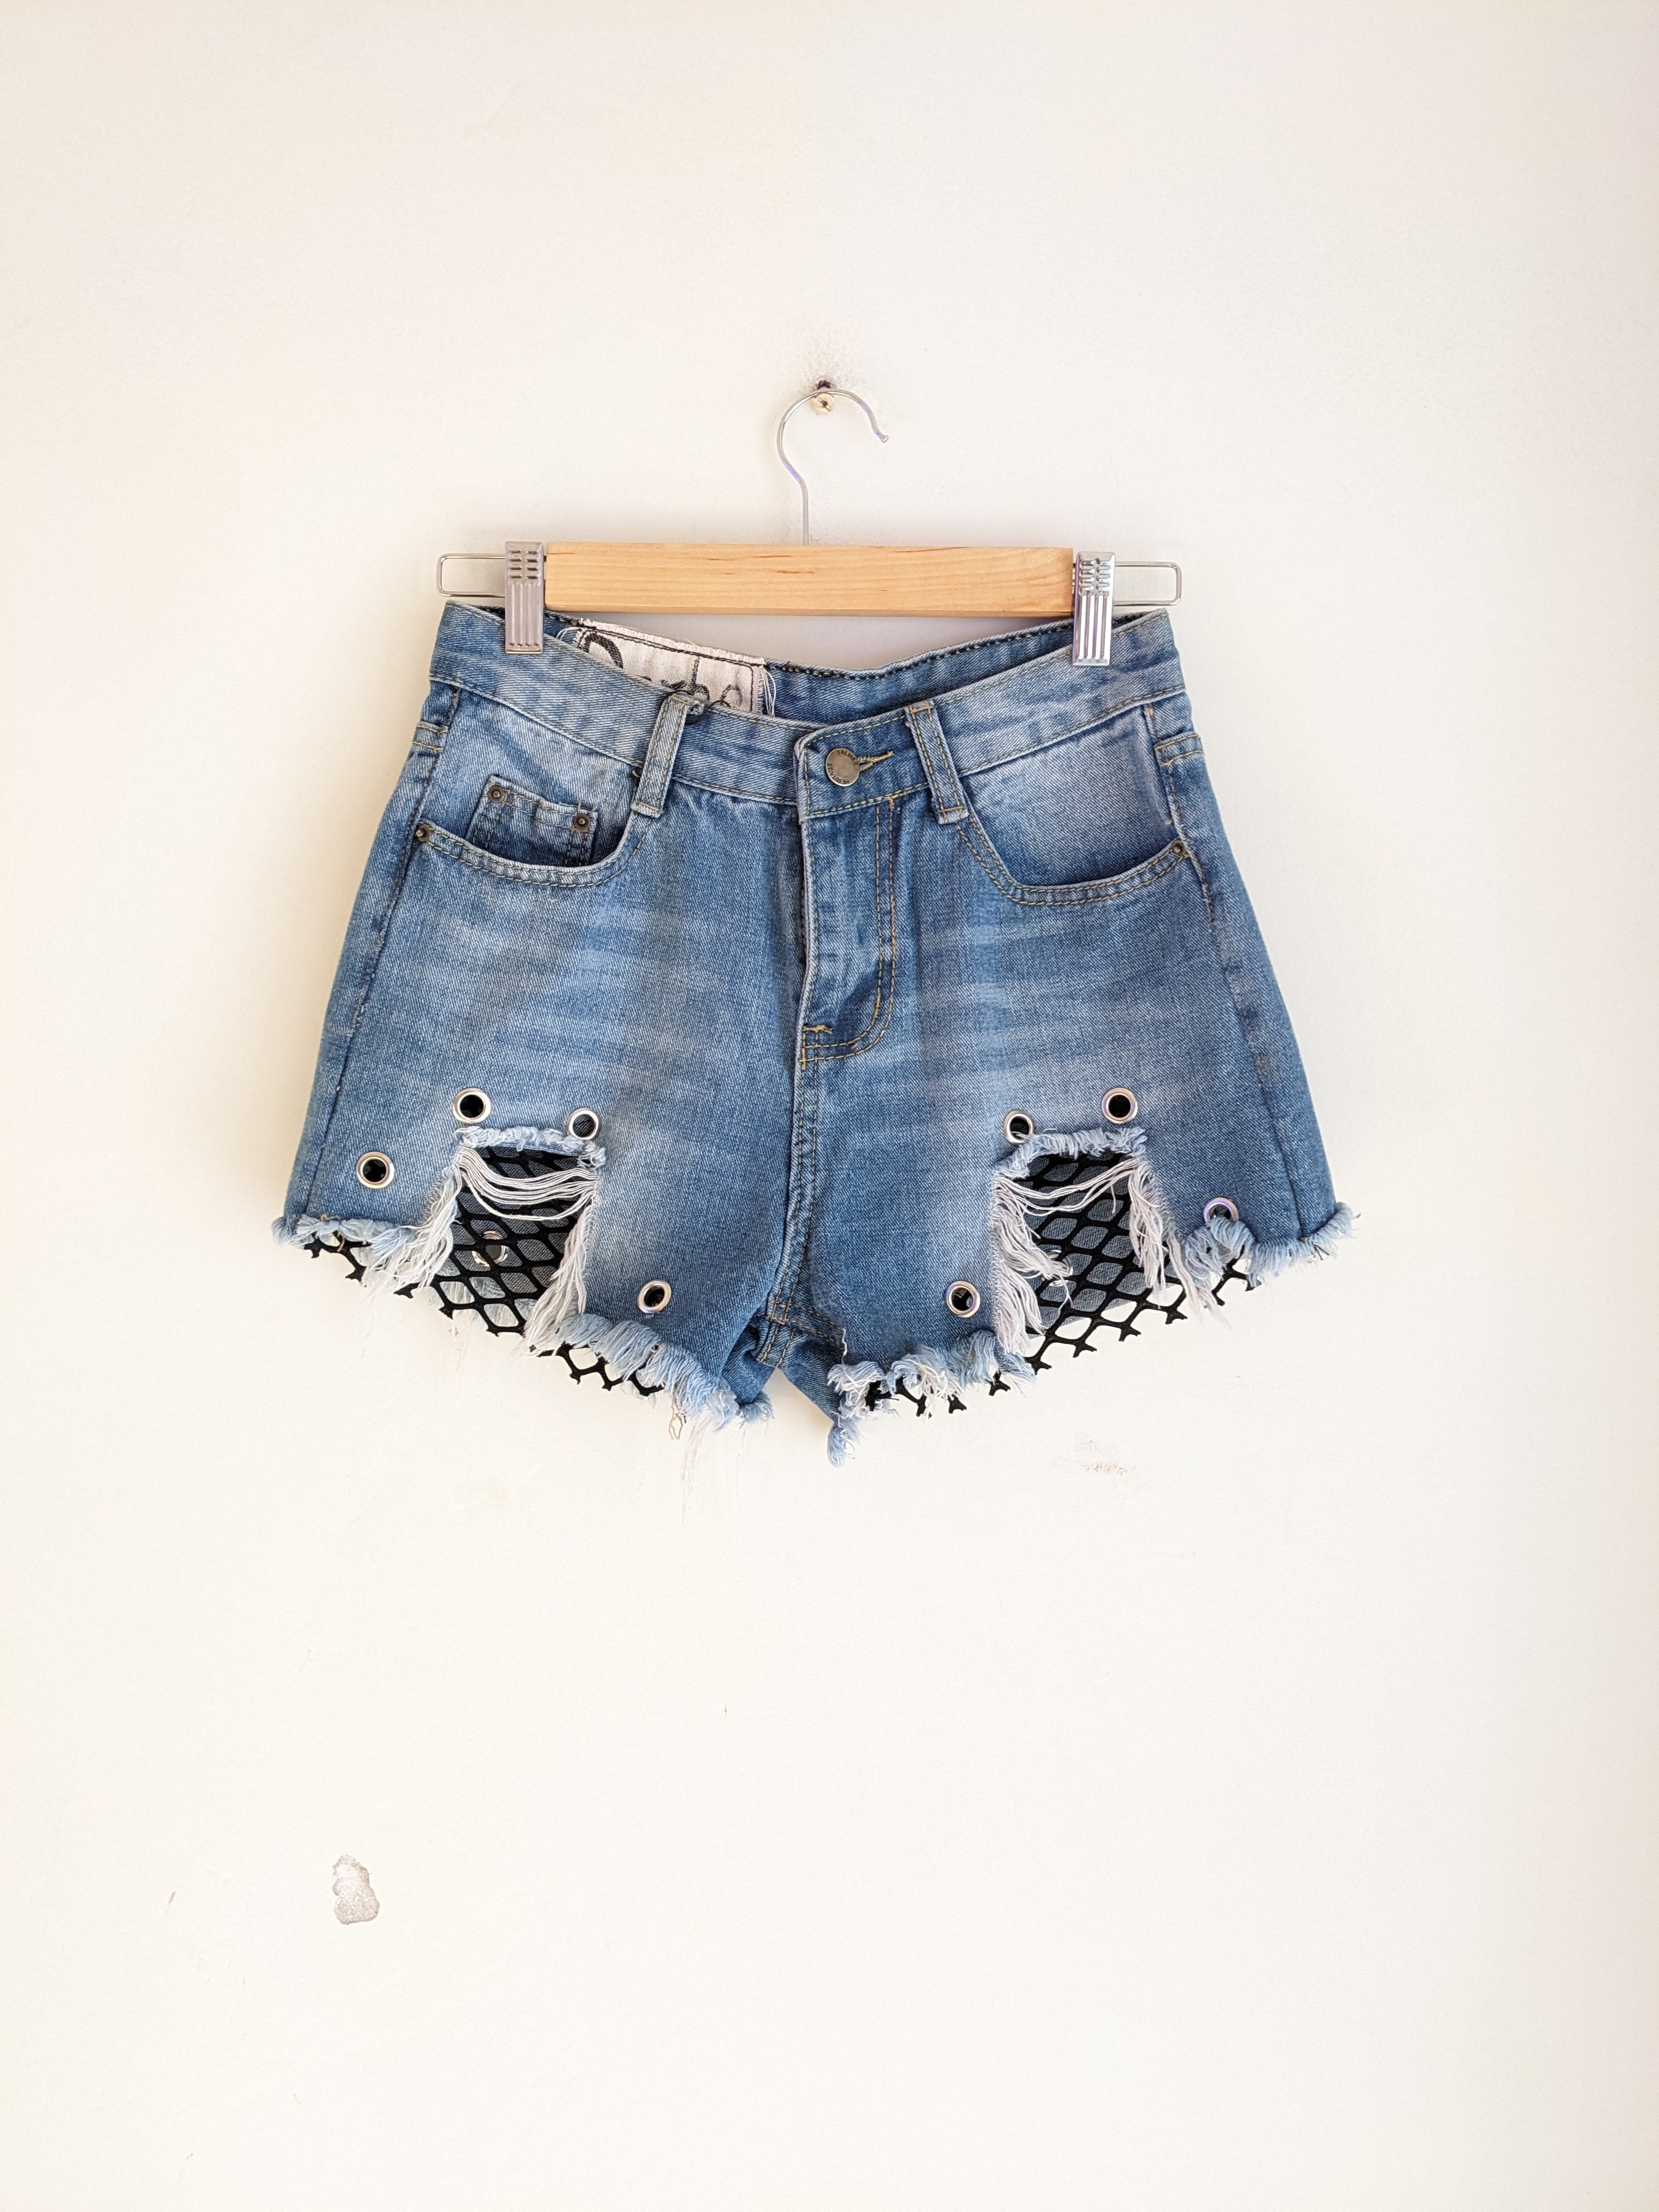 12 Jean Shorts Outfits to Try This Summer - PureWow